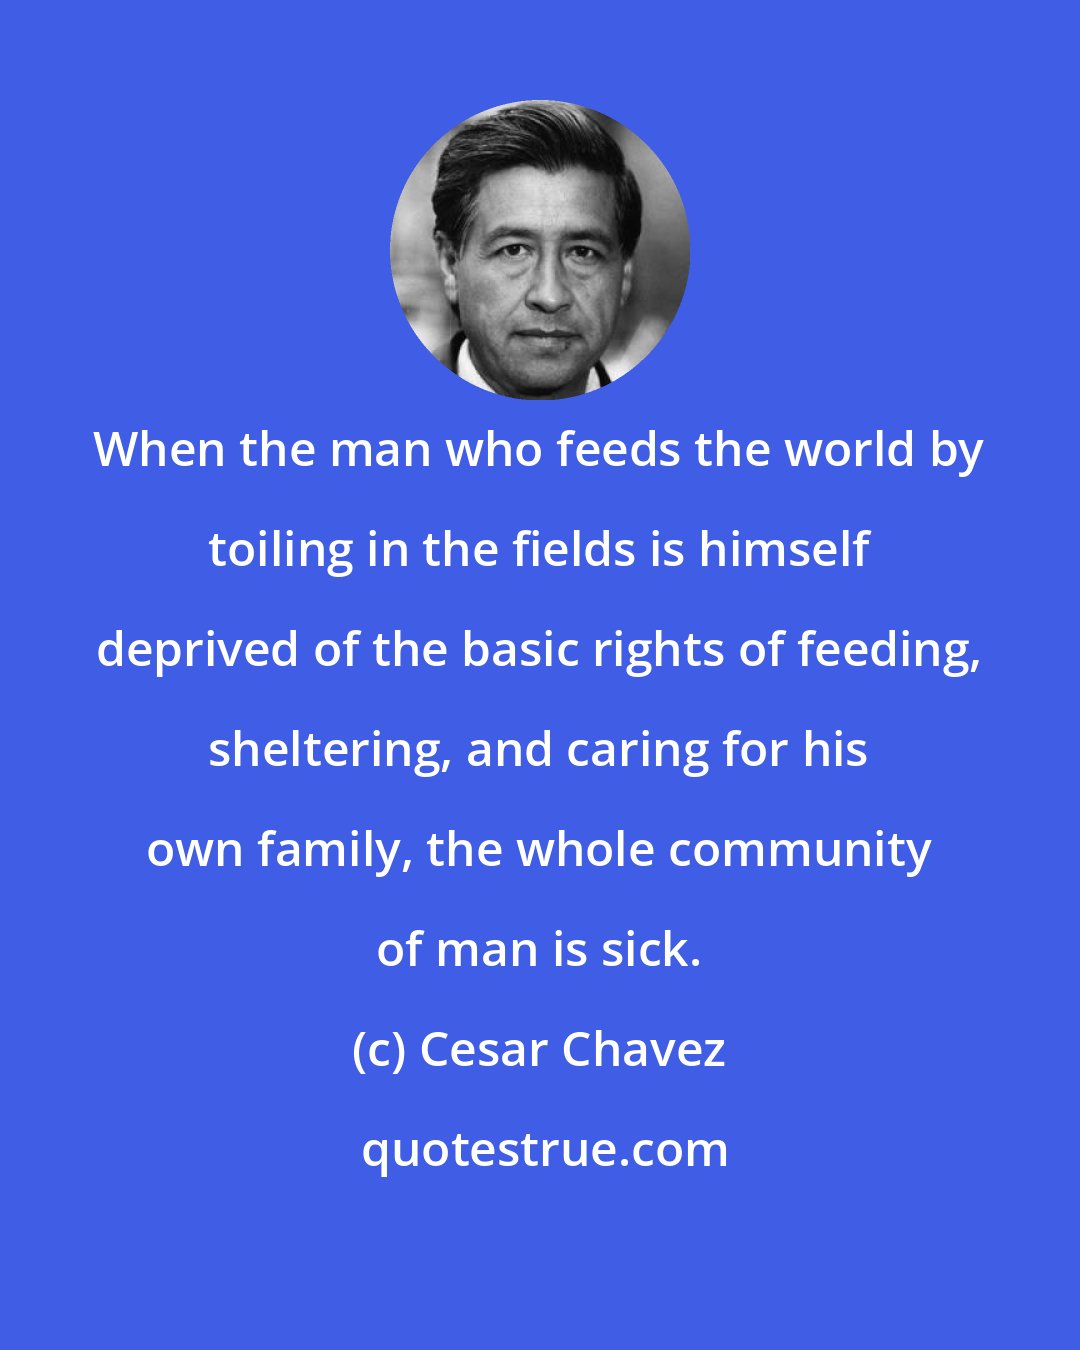 Cesar Chavez: When the man who feeds the world by toiling in the fields is himself deprived of the basic rights of feeding, sheltering, and caring for his own family, the whole community of man is sick.